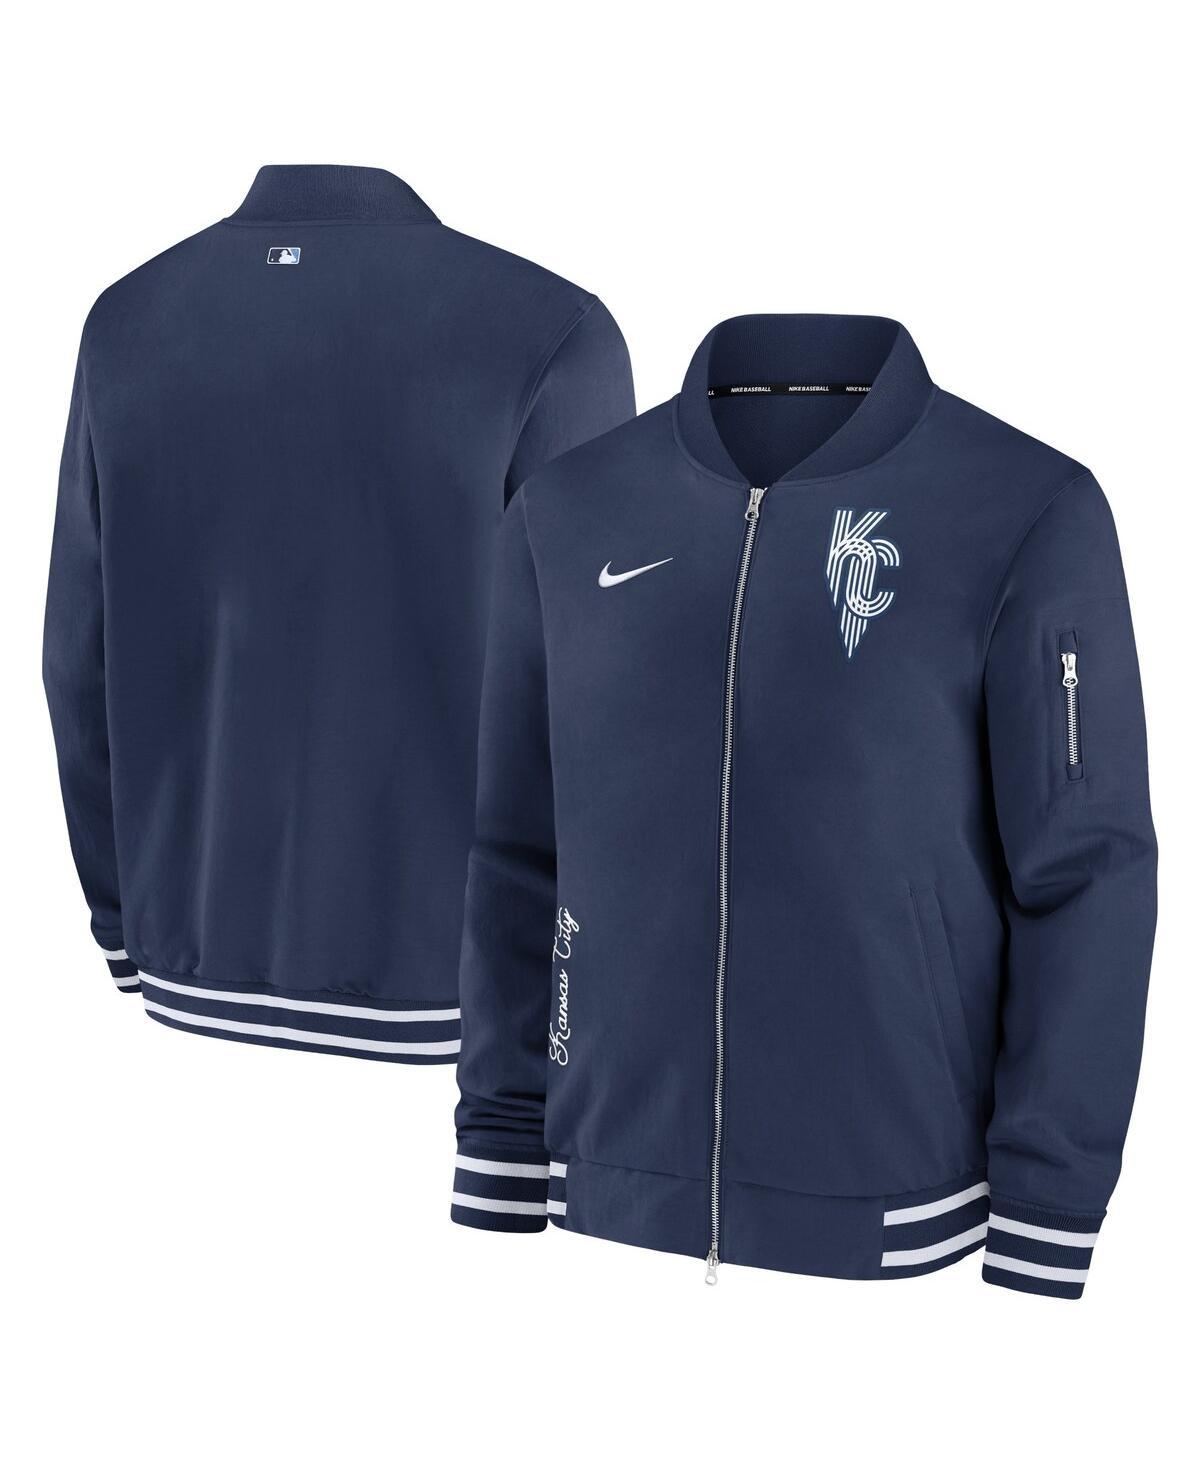 Men's Nike Navy Kansas City Royals Authentic Collection Game Time Bomber Full-Zip Jacket - Navy